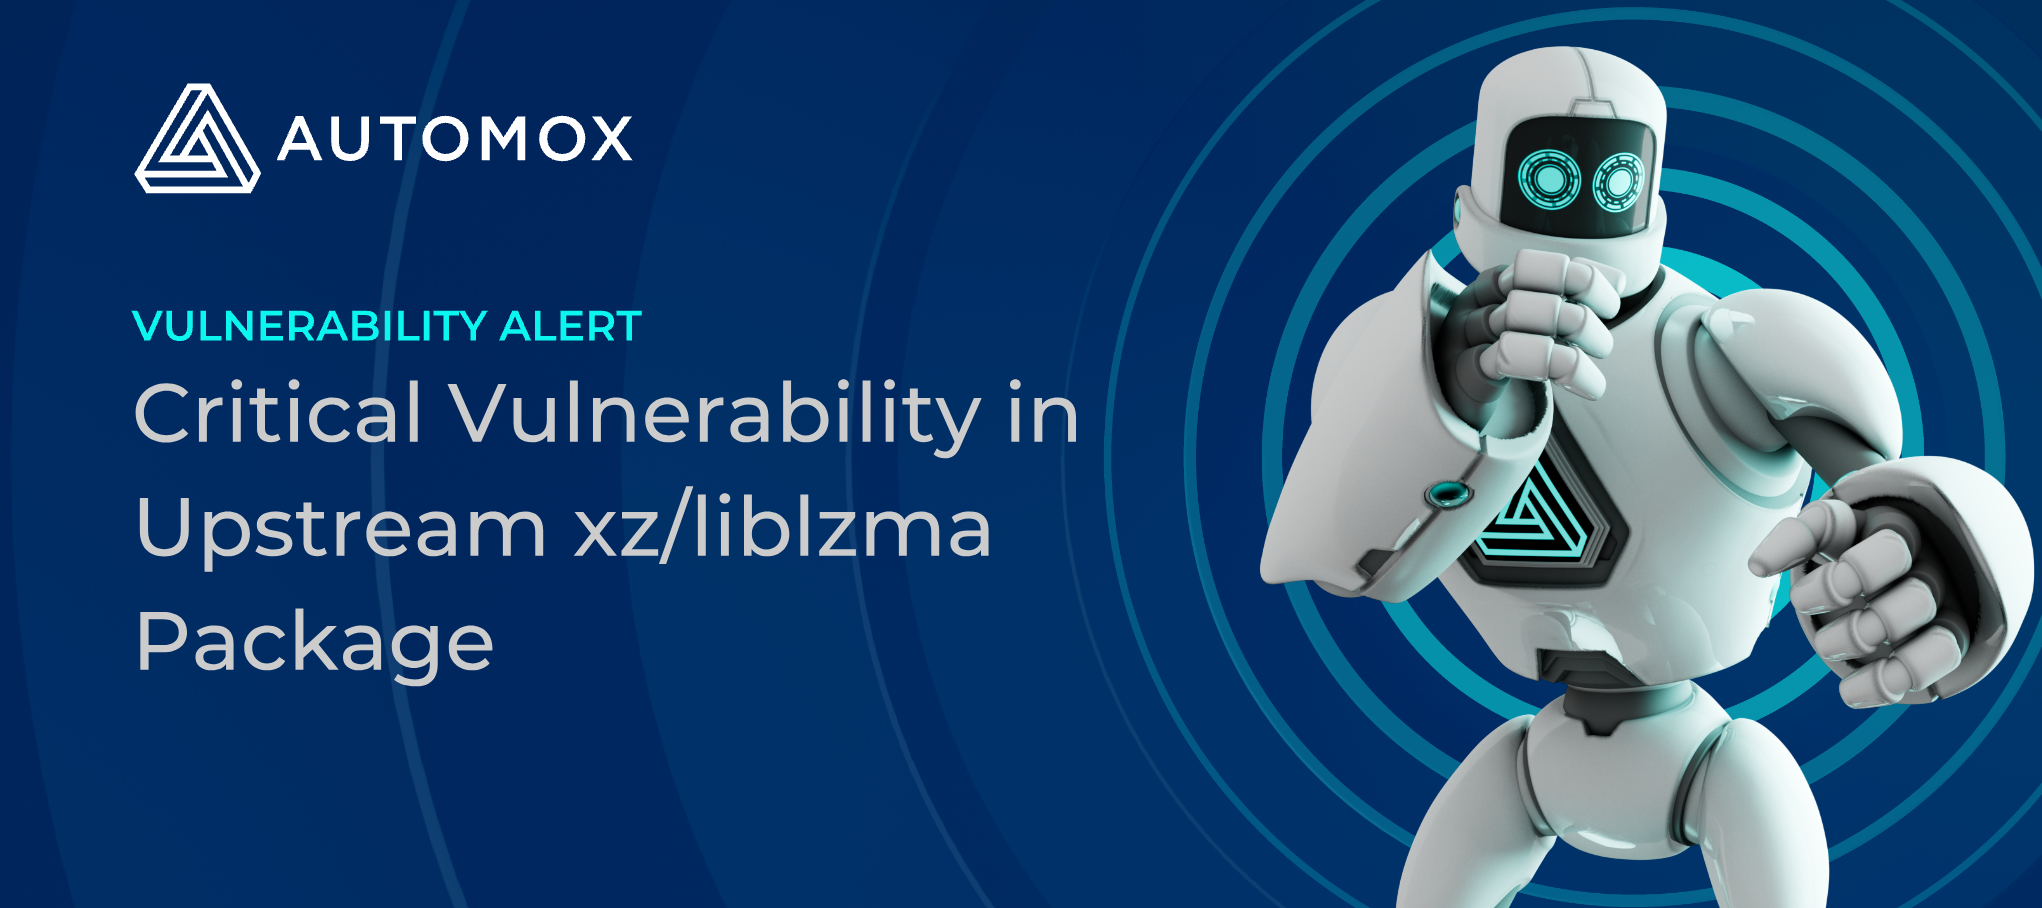 Protect Your Systems: Critical Vulnerability in Upstream xz/liblzma Package